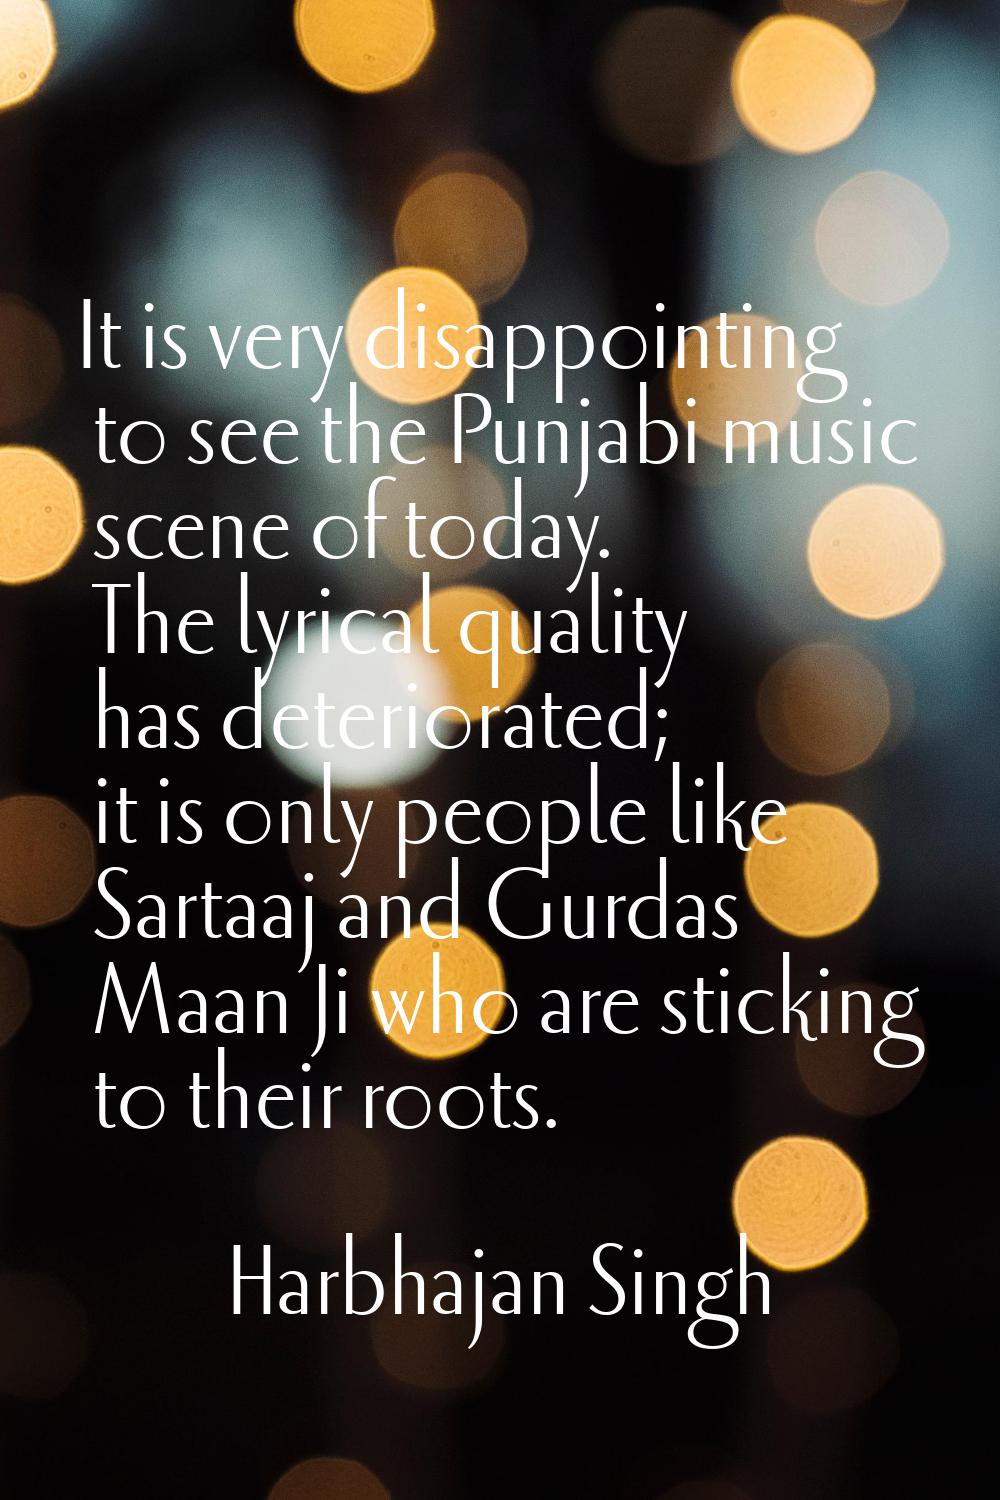 It is very disappointing to see the Punjabi music scene of today. The lyrical quality has deteriora